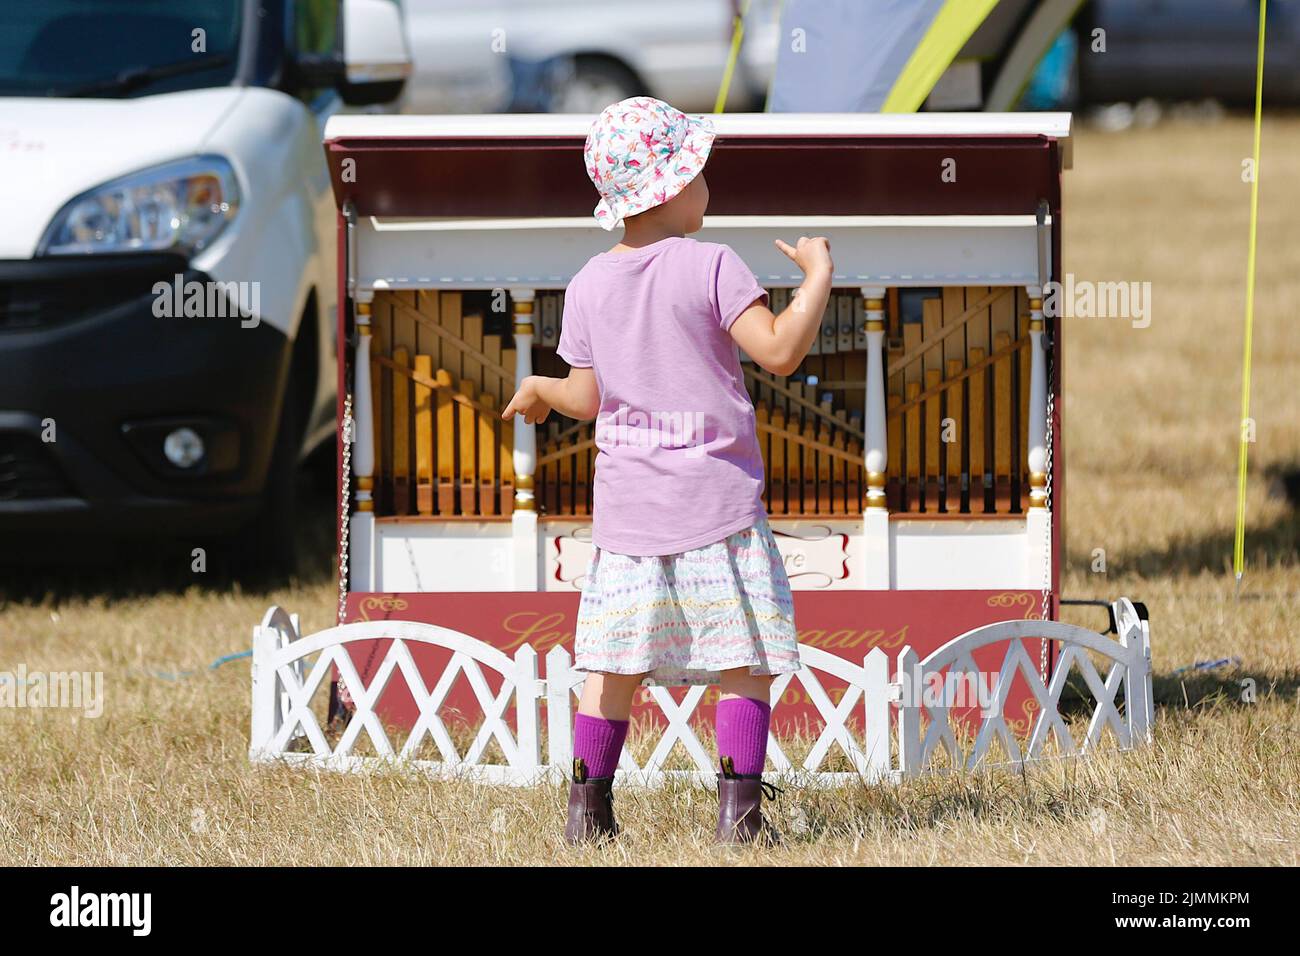 Woodchurch, Kent, UK. 07 August, 2022. On a hot and sunny day in the Kent countryside thousands of people arrive at one of the largest steam rally events in the south east. A young girl enjoys a tune from an pipe organ. Photo Credit: Paul Lawrenson/Alamy Live News Stock Photo